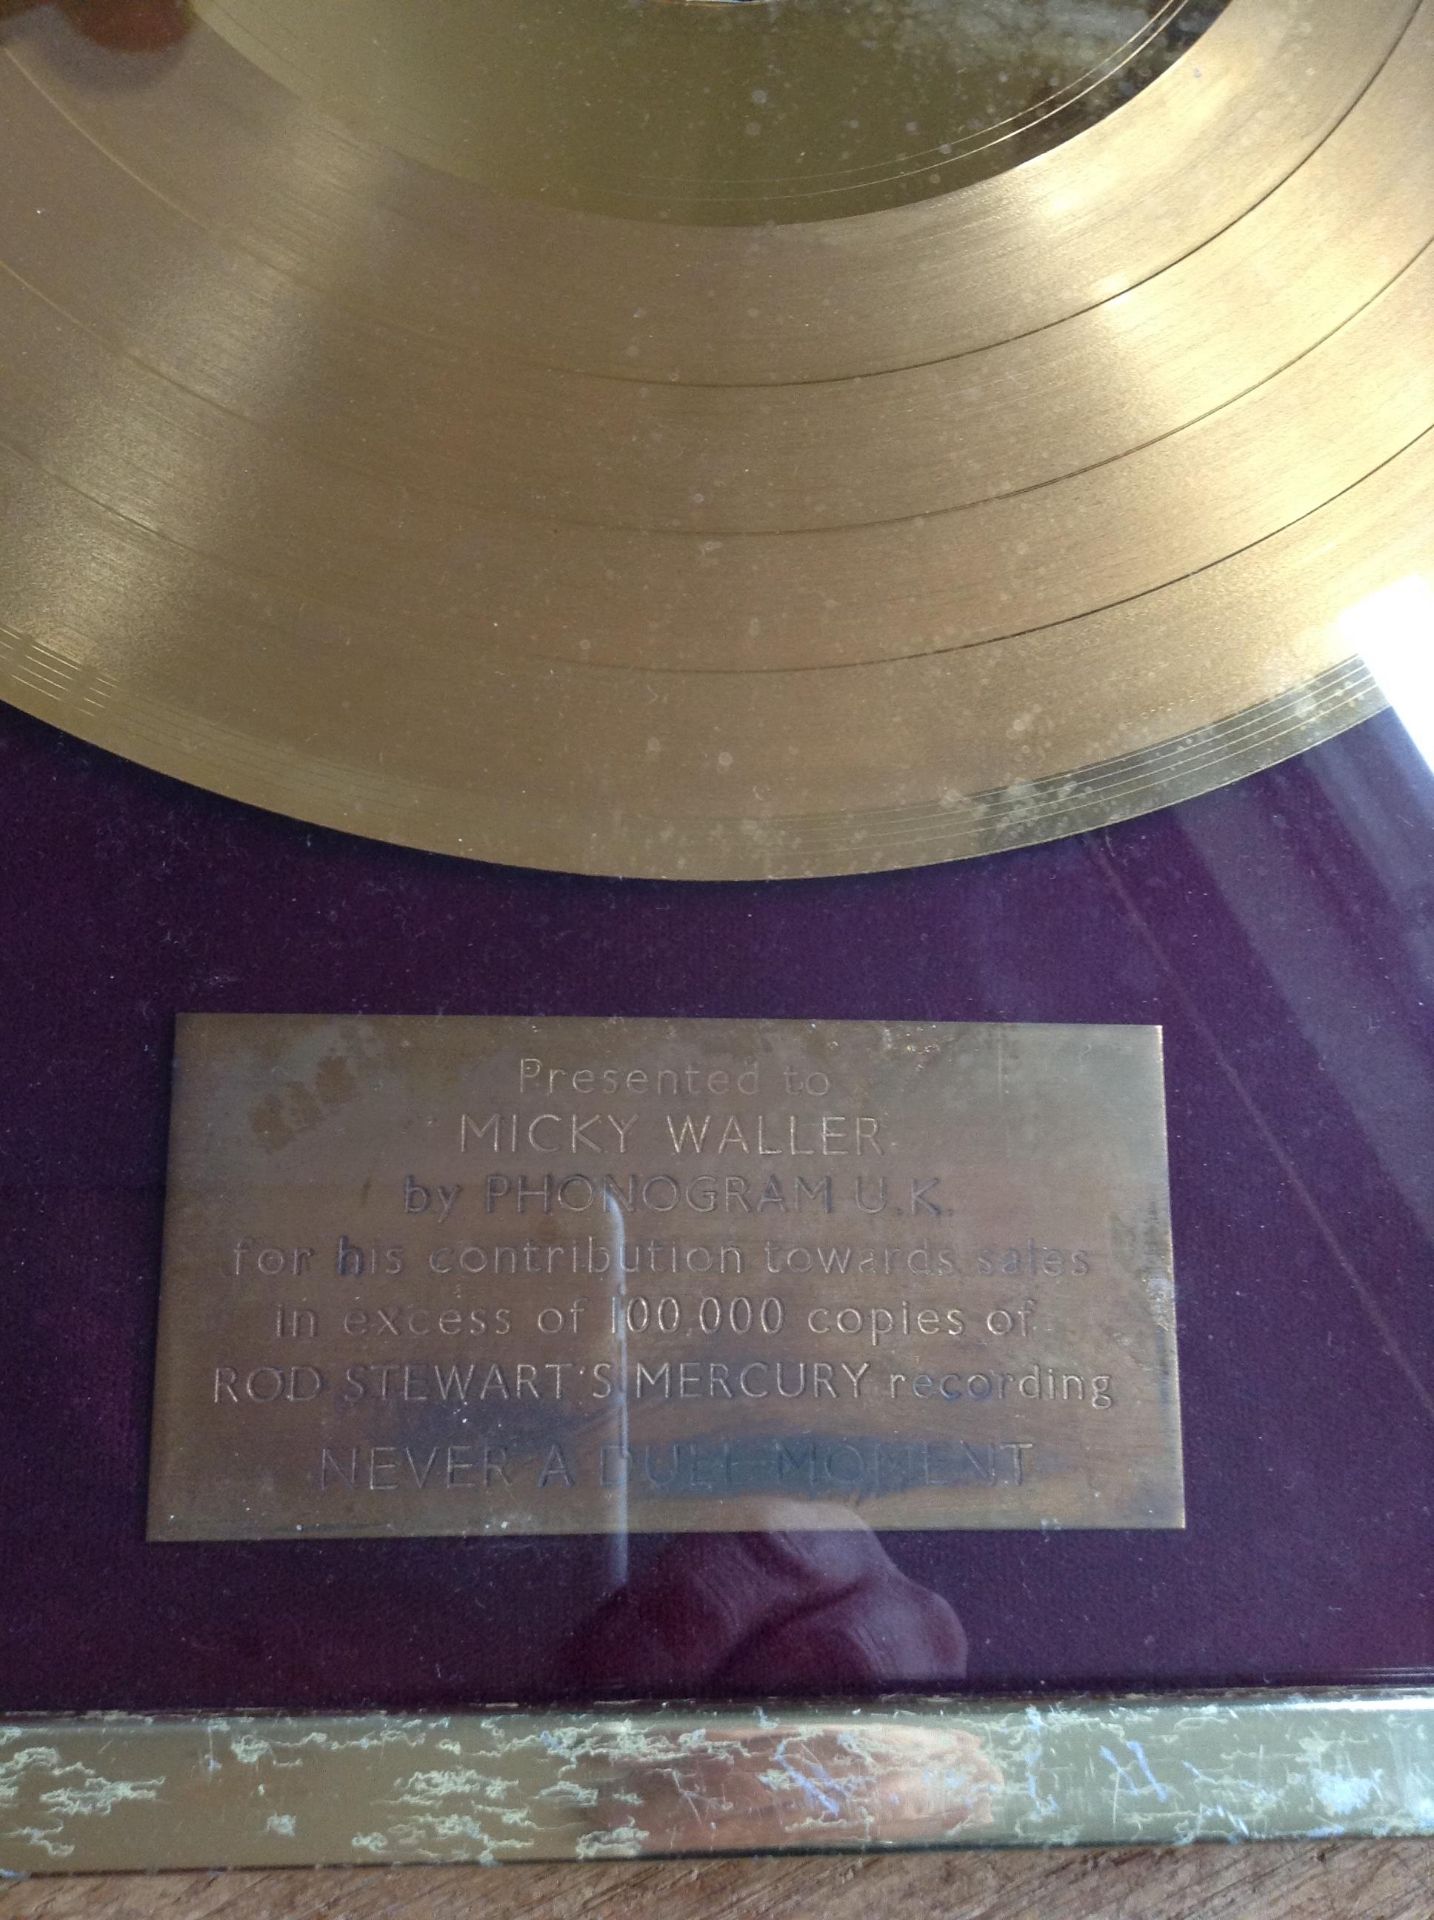 GENUINE MUSIC INDUSTRY GOLD & SILVER DISC AWARDS PRESENTED BY PHONOGRAM U.K TO DRUMMER MICKY WALLER - Image 4 of 5